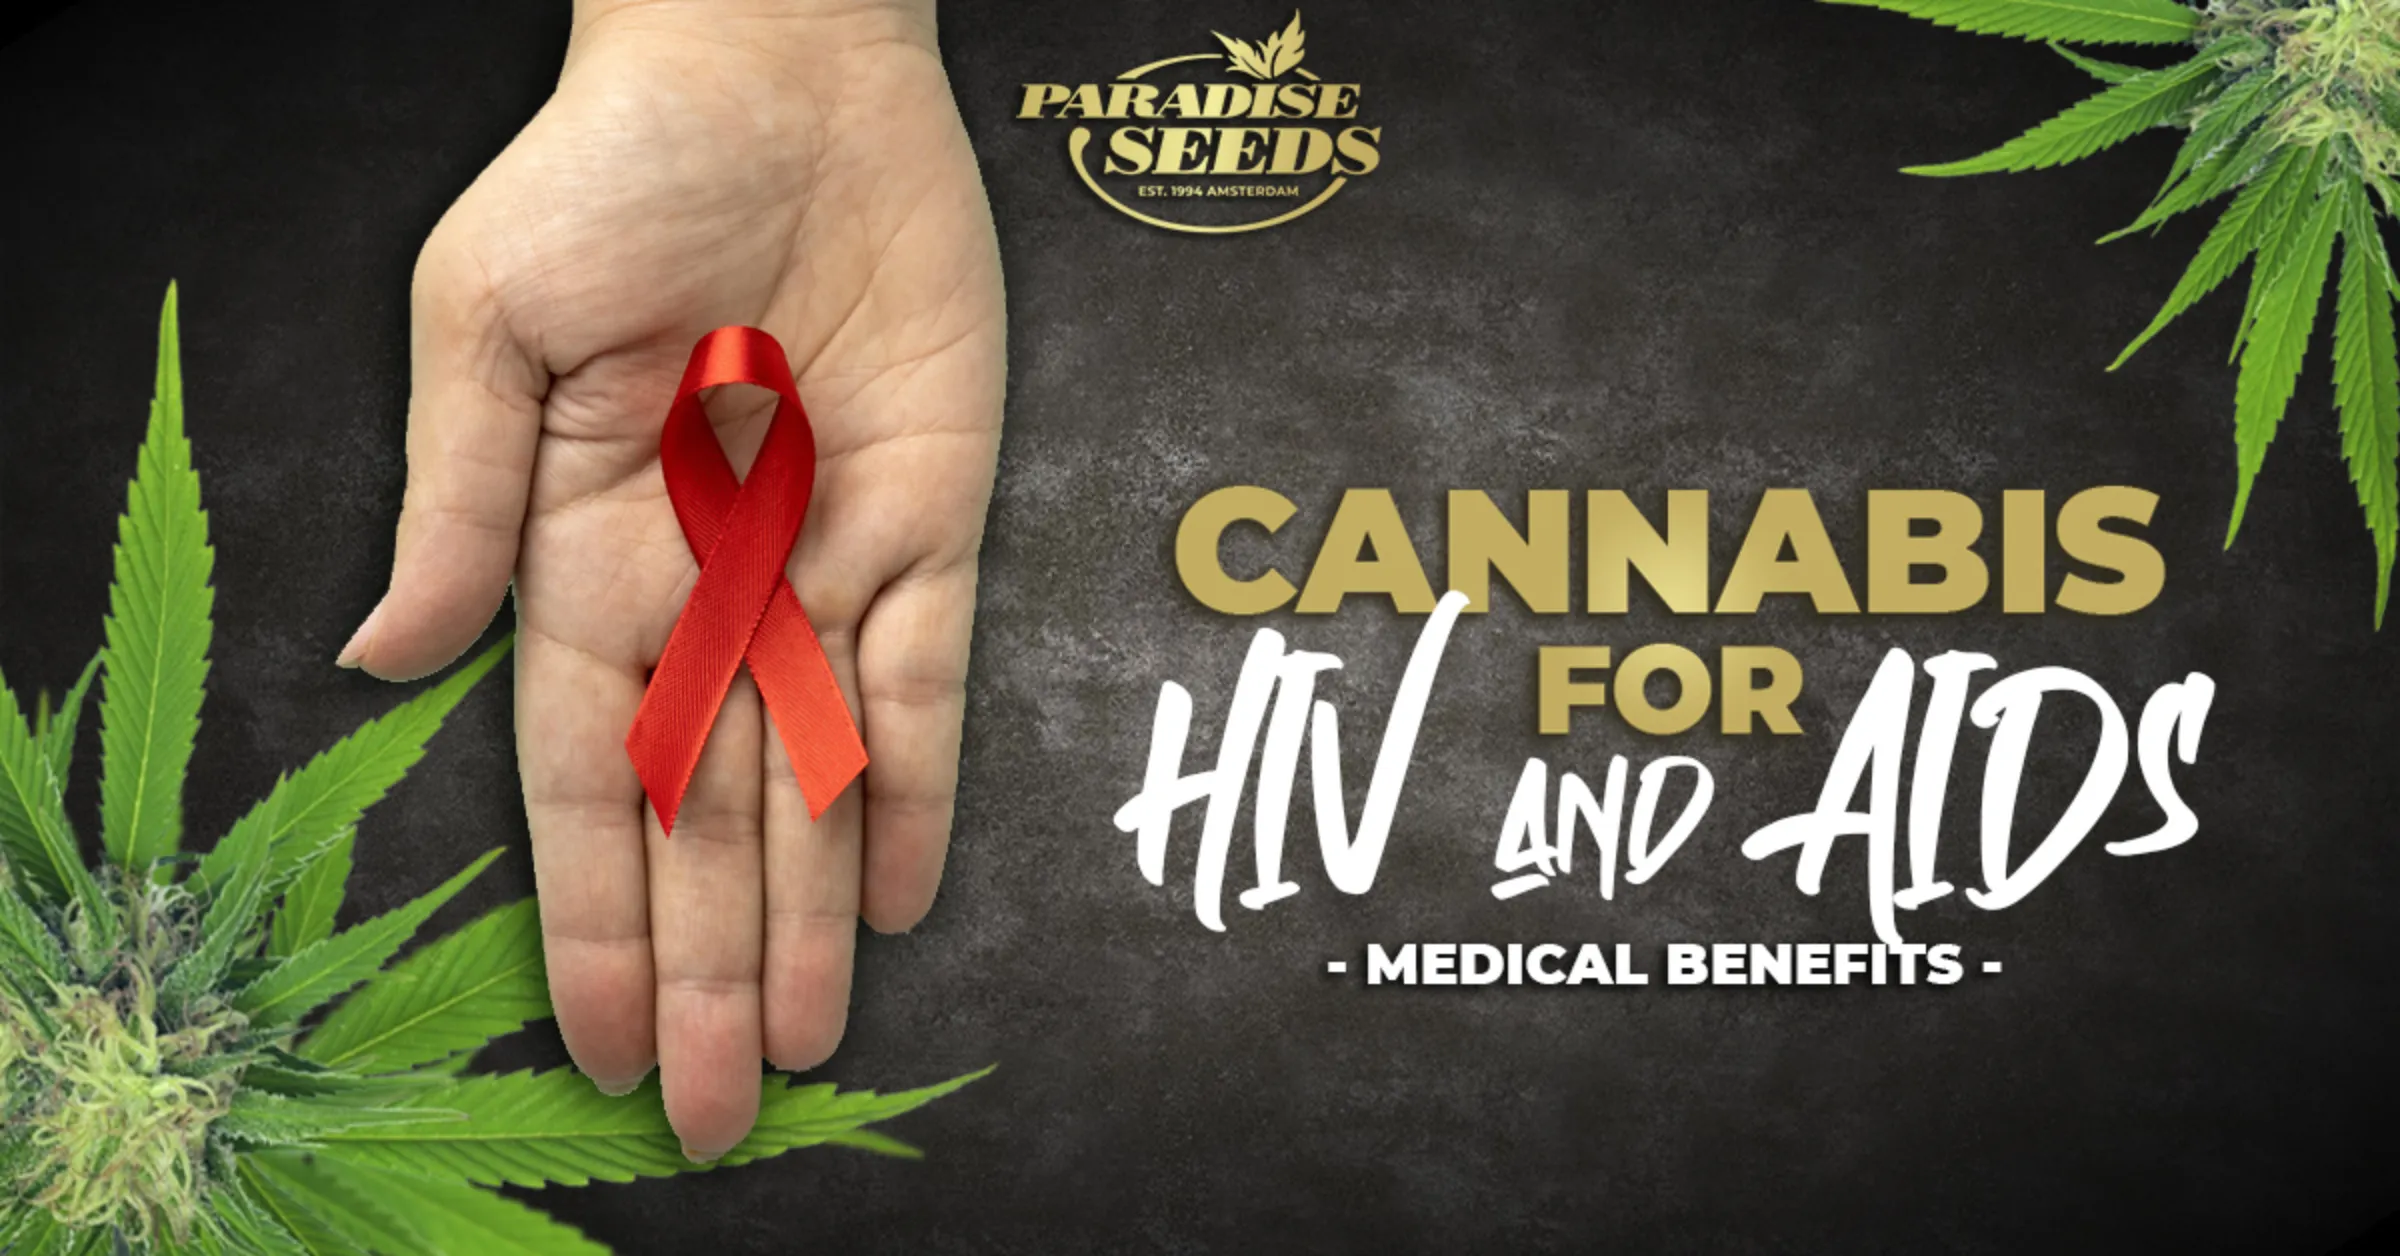 The Benefits of Medical Cannabis for HIV and AIDS patients | Paradise Seeds Webshop